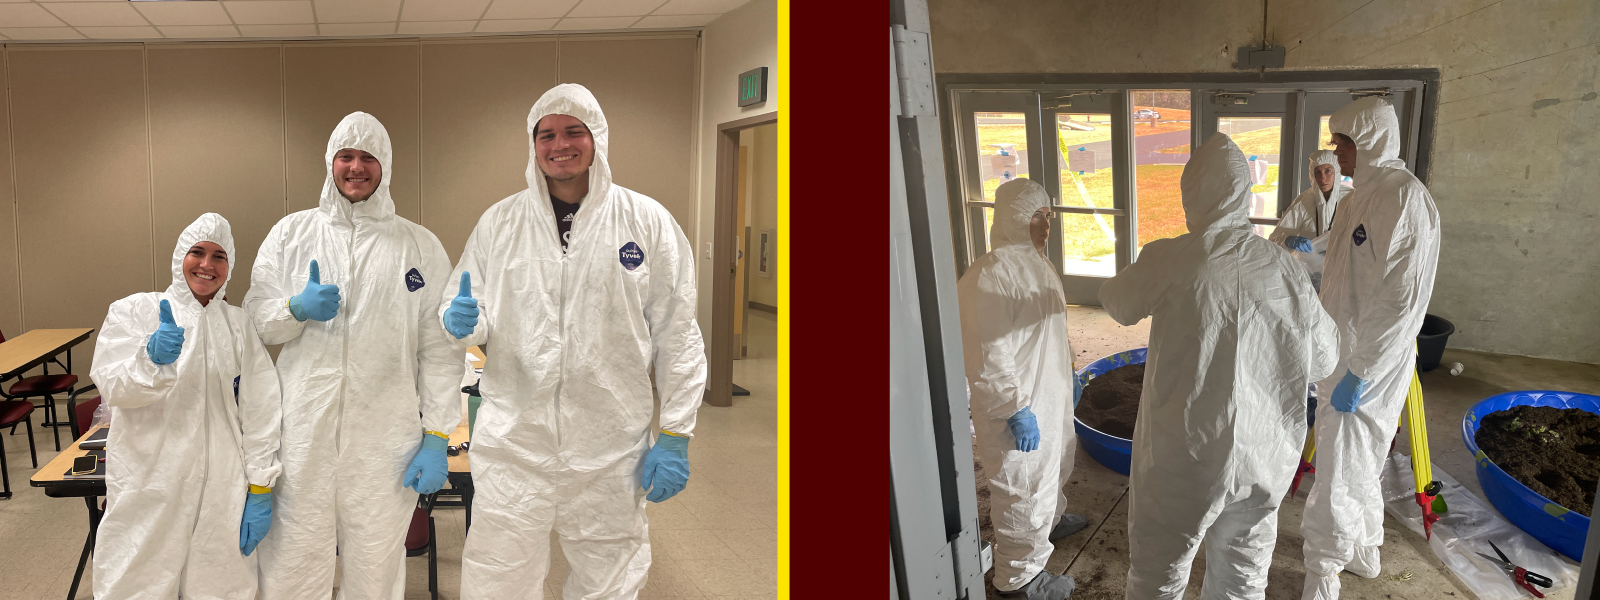 NSSPI Conducts Contamination Exercise for NNSA Radiological Response Teams